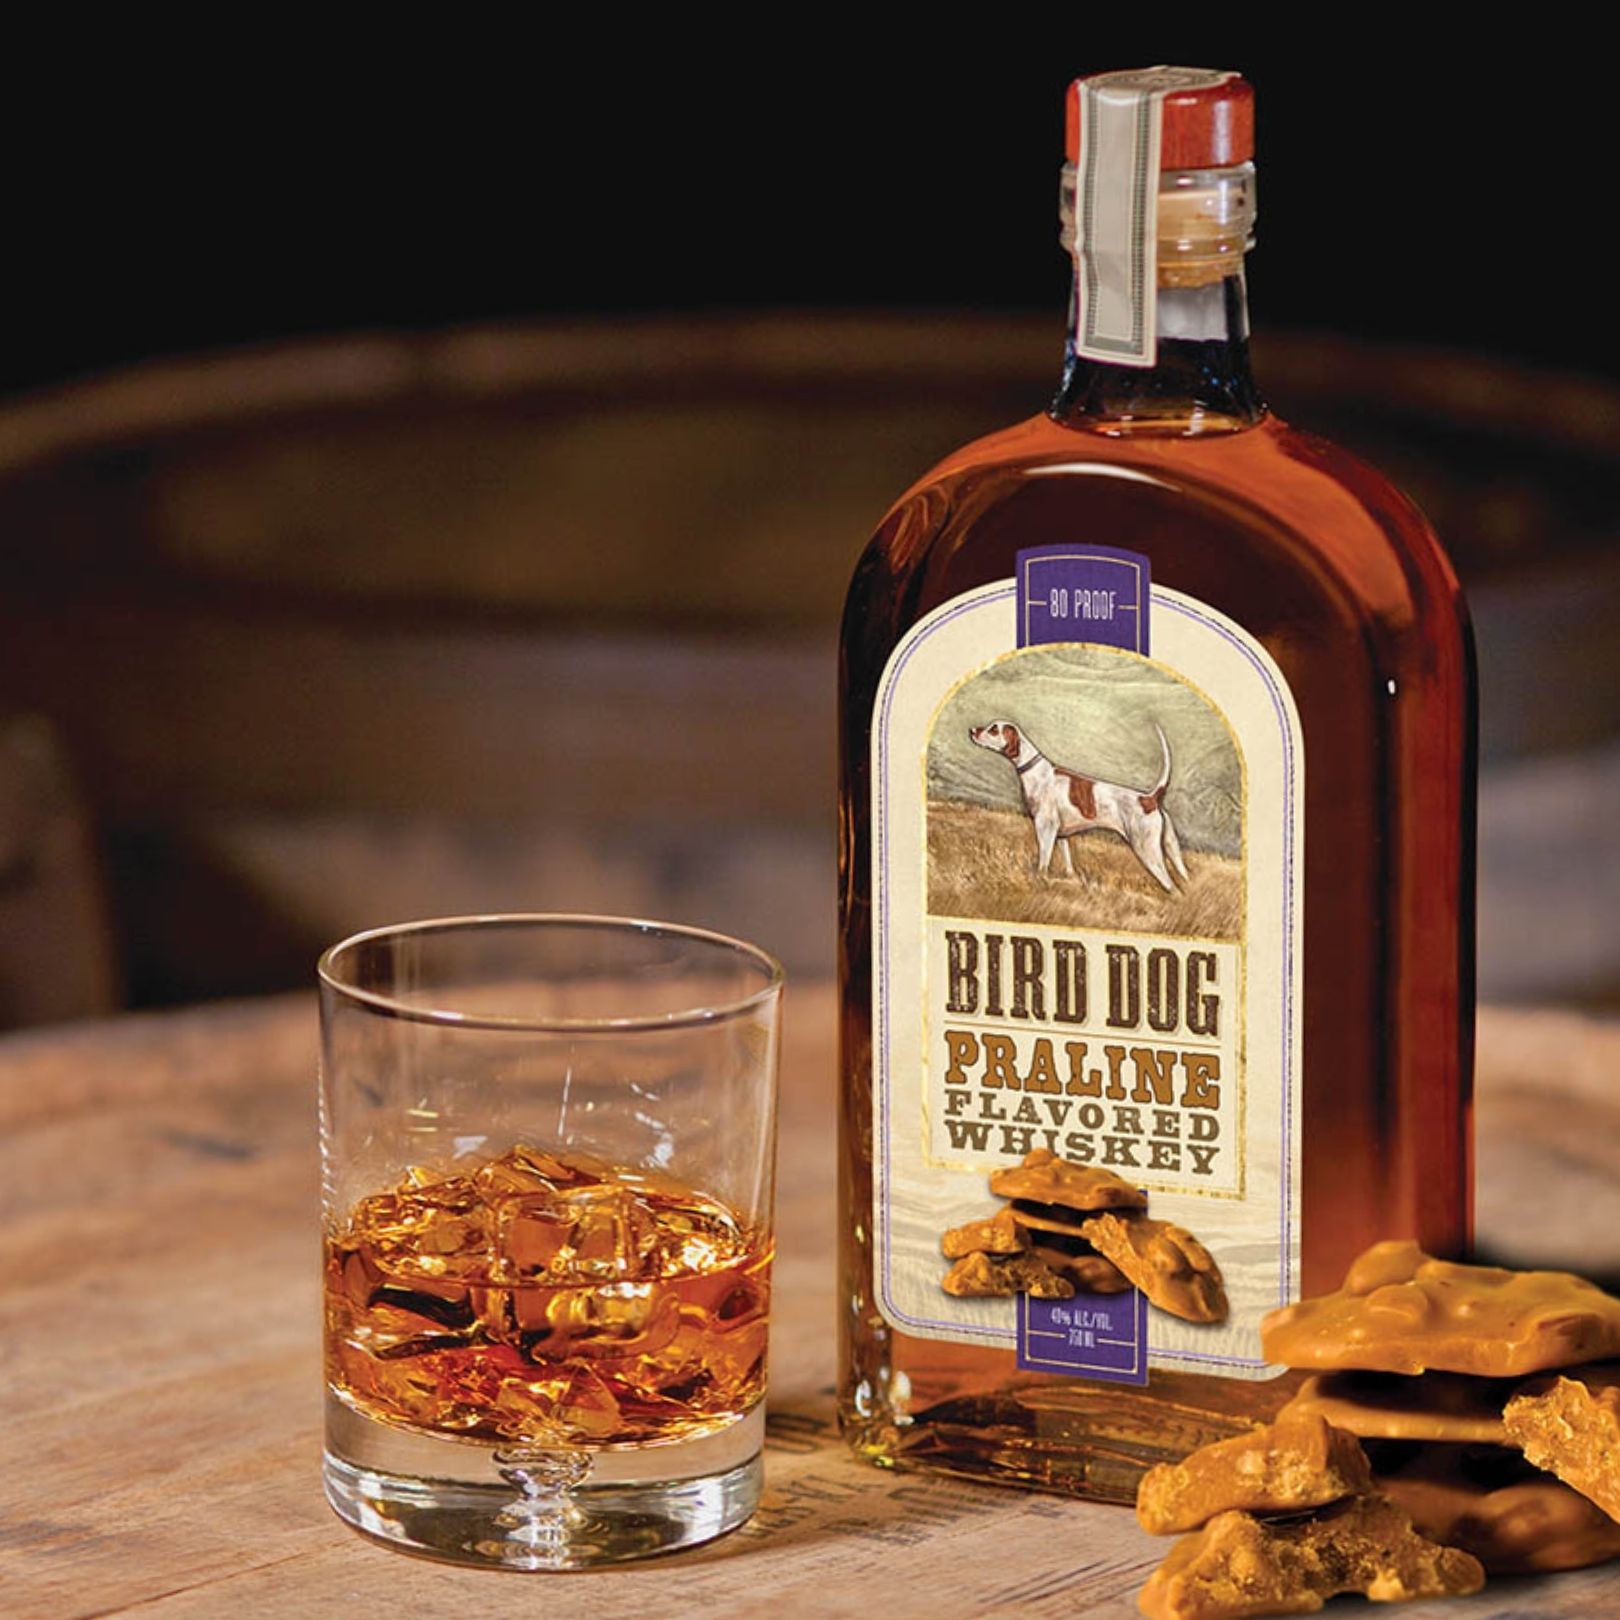 Bottle of Bird Dog Praline Whiskey with a Cocktail